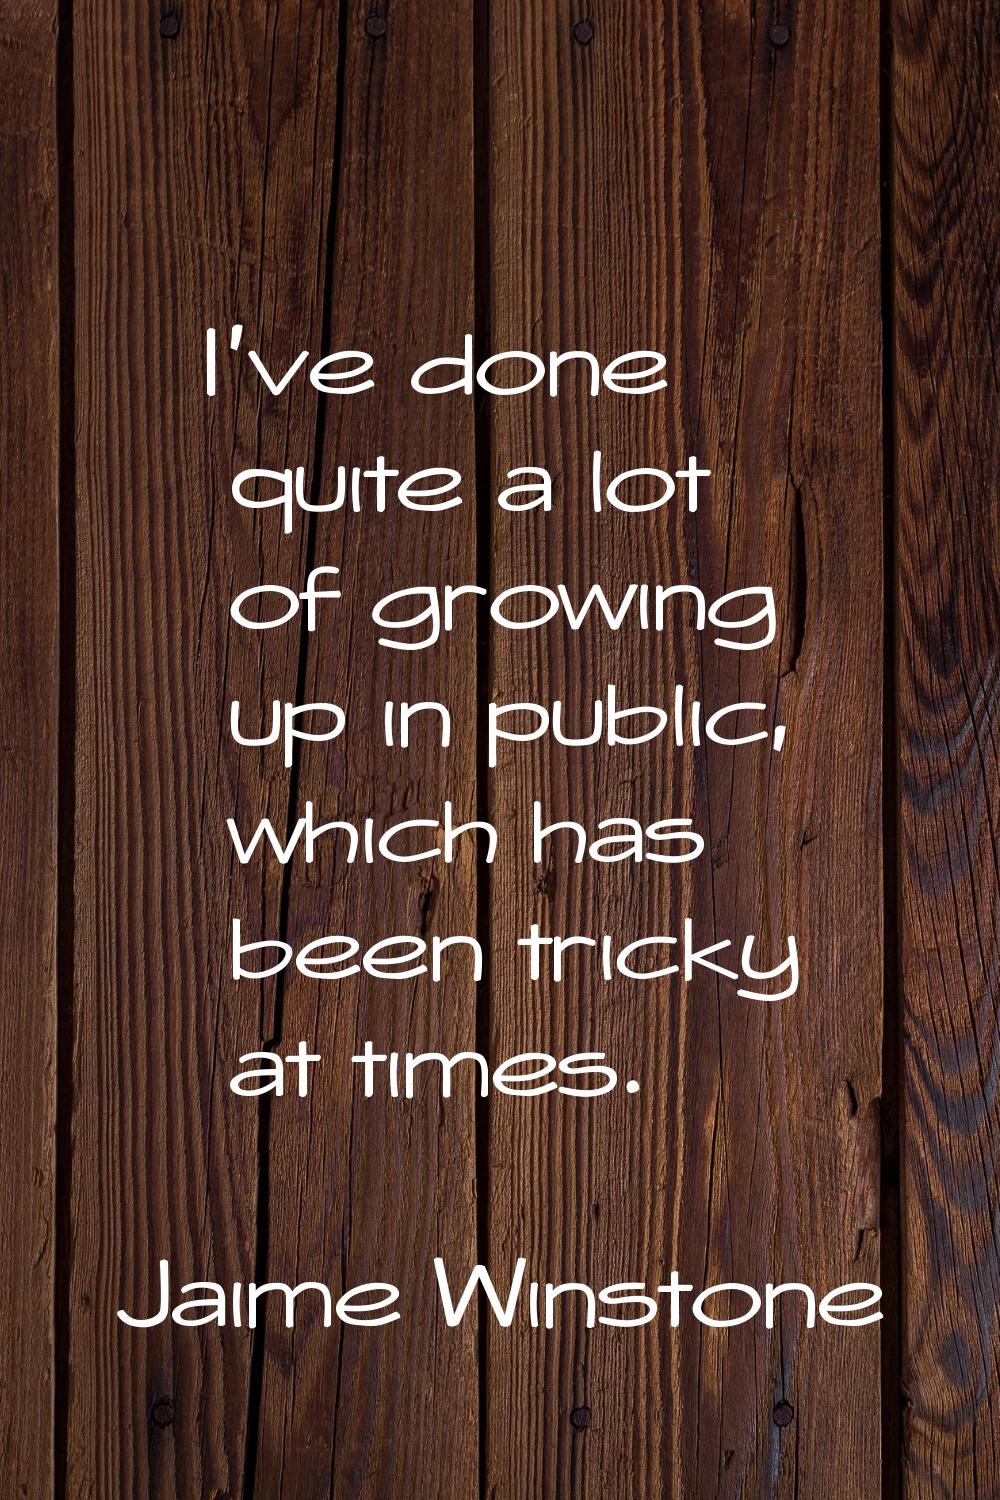 I've done quite a lot of growing up in public, which has been tricky at times.